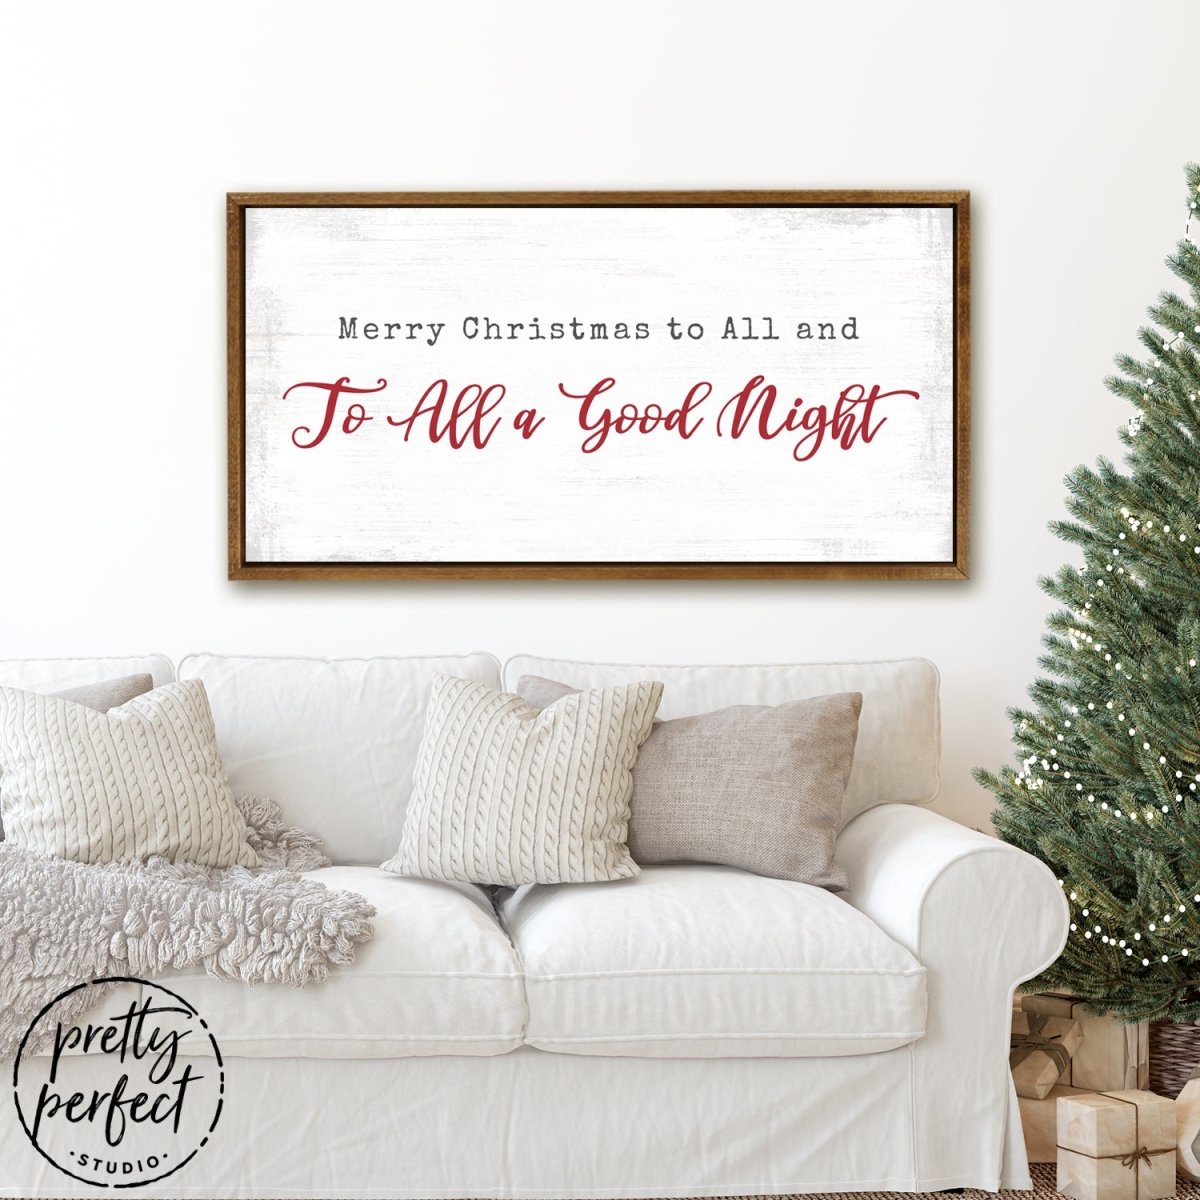 Merry Christmas to All And To All A Good Night Wall Art Above Couch in the Living Room - Pretty Perfect Studio